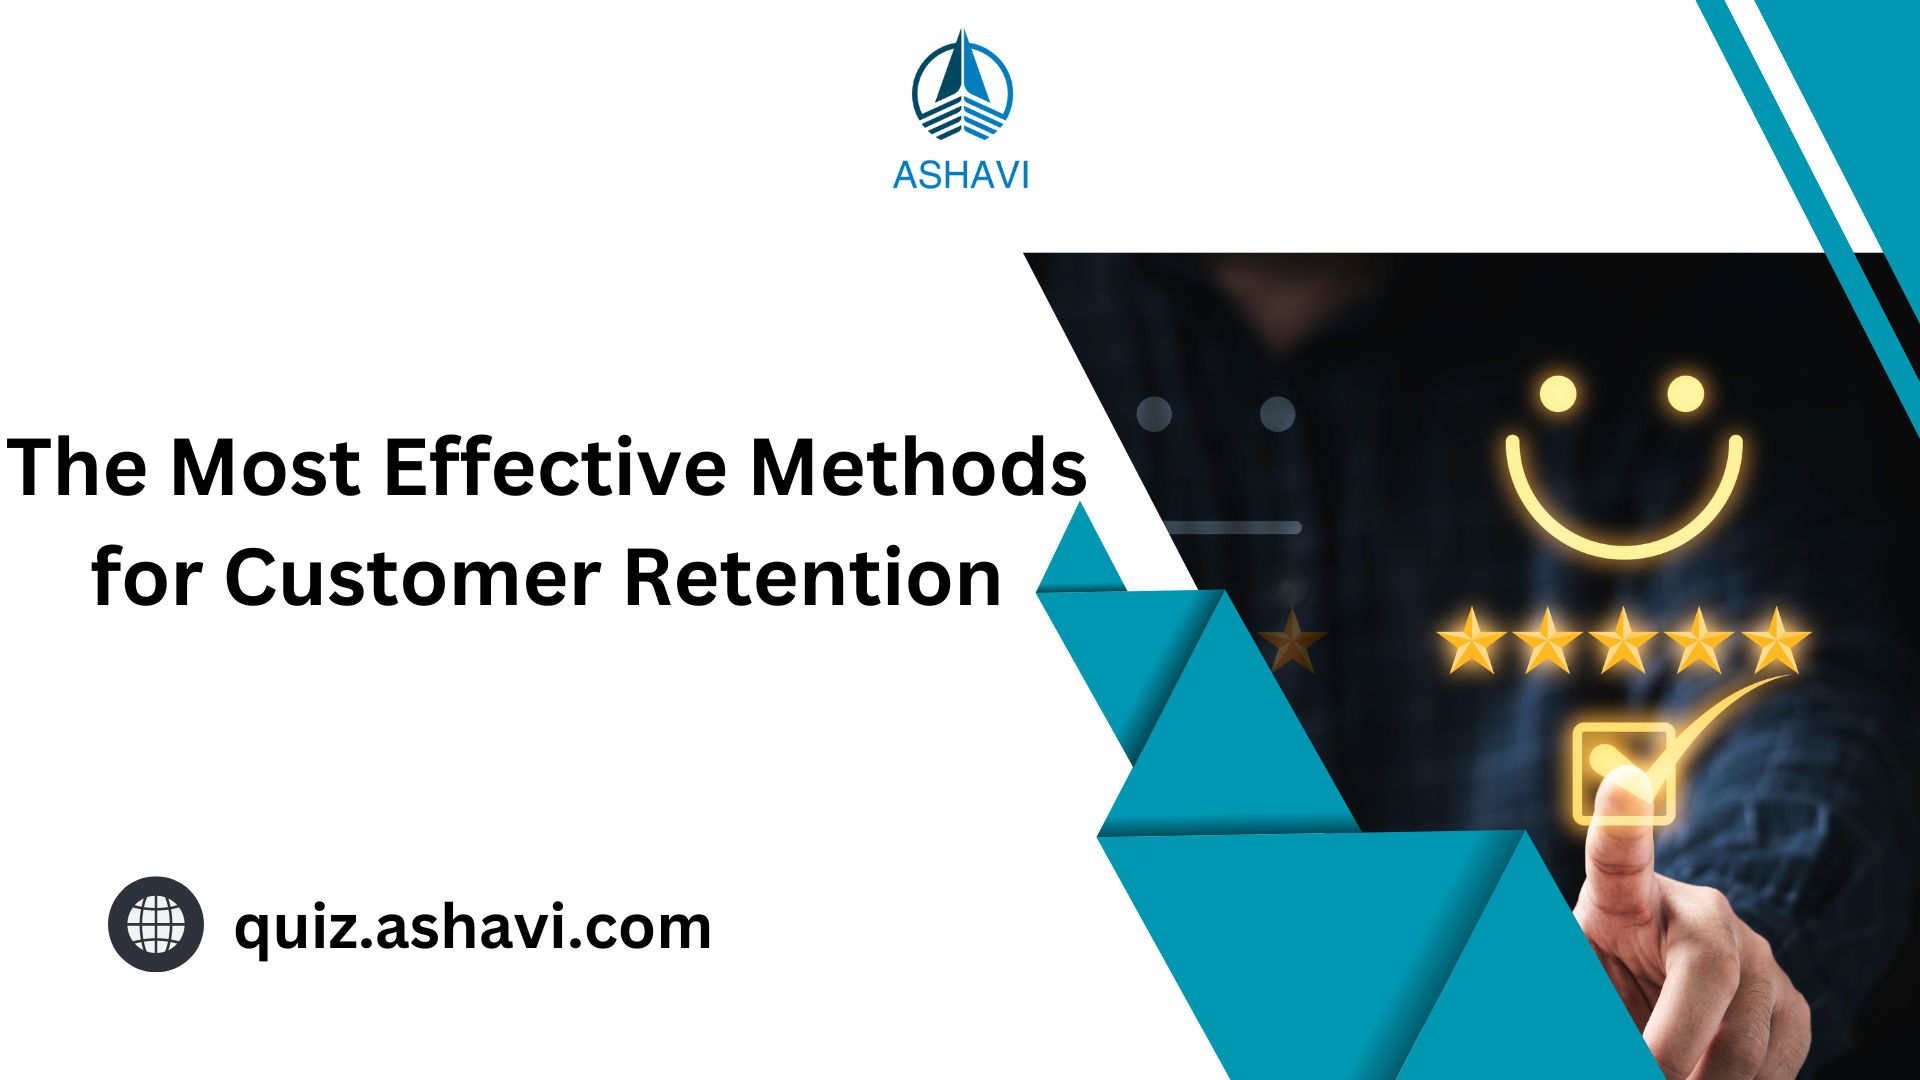 The Most Effective Methods for Customer Retention